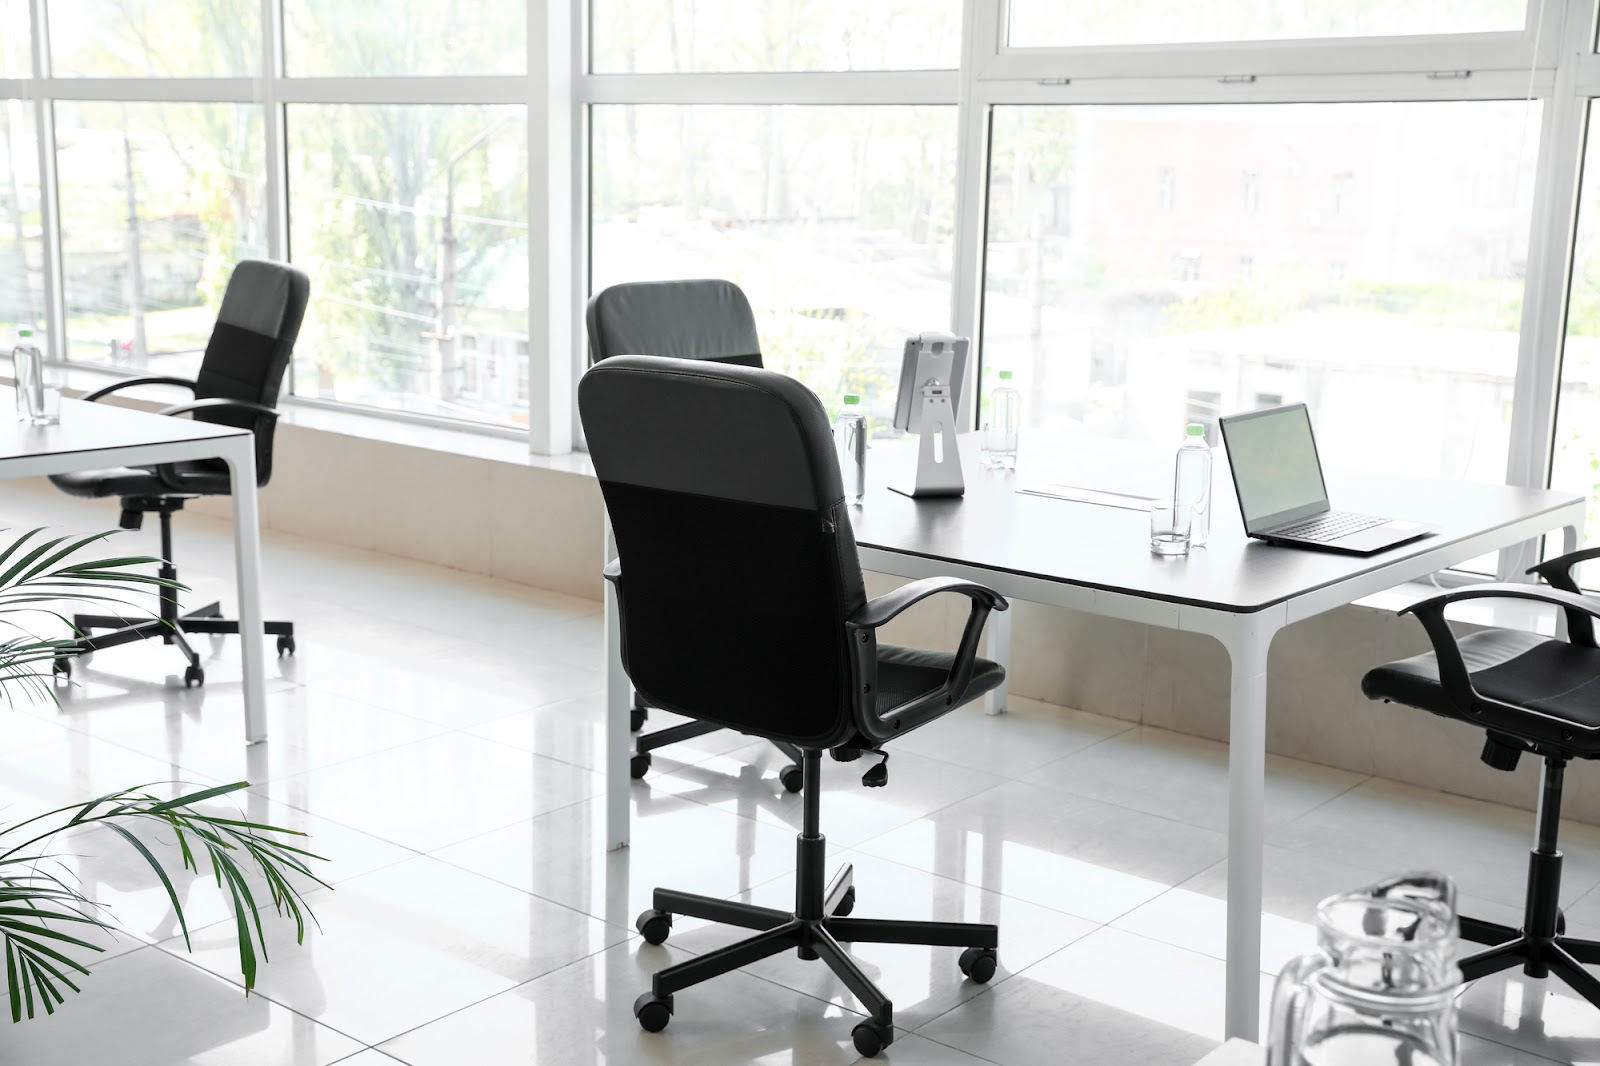 Modern office work space with desks and comfortable swivel chairs